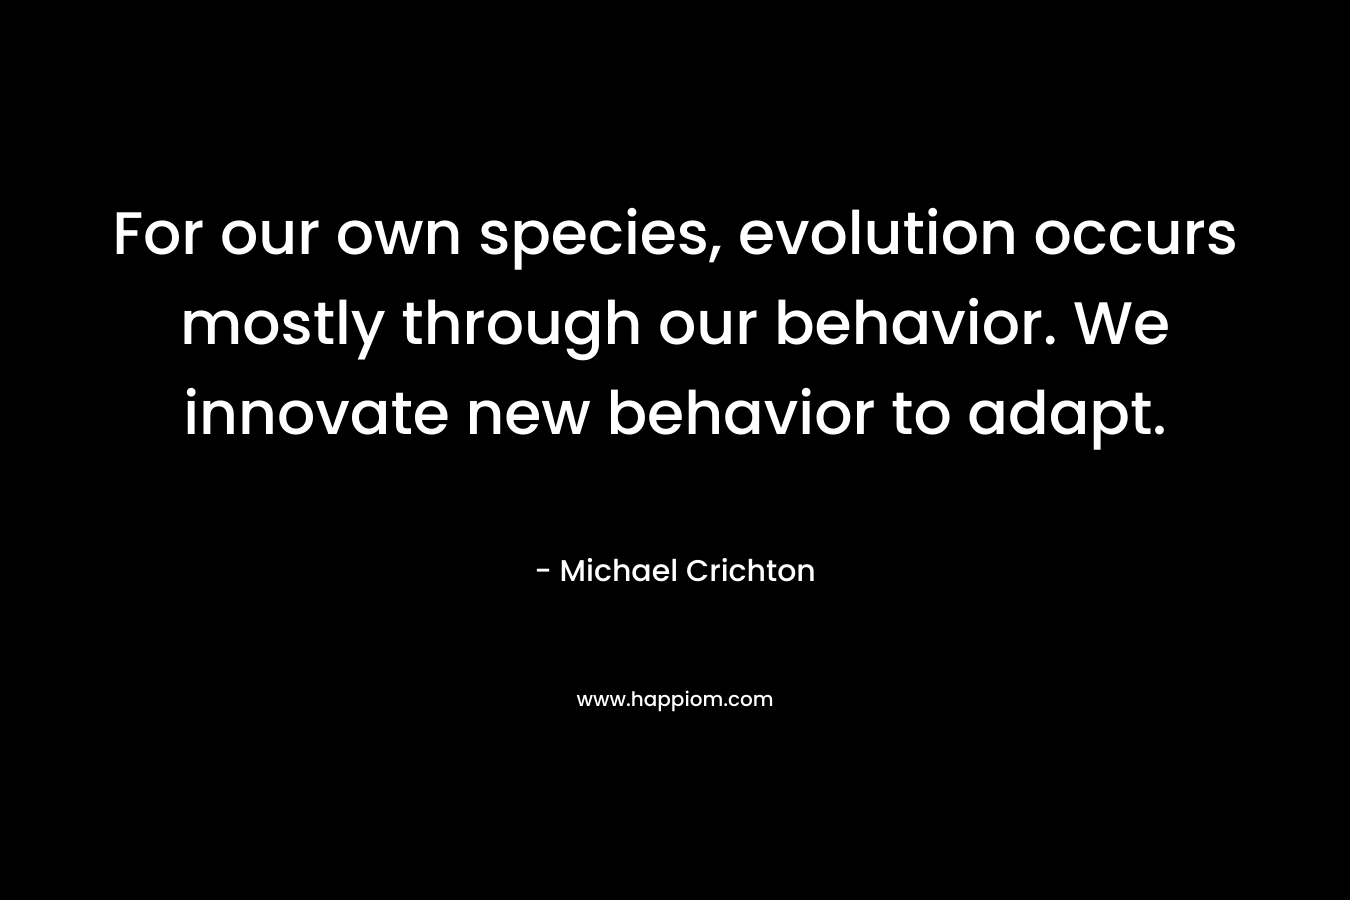 For our own species, evolution occurs mostly through our behavior. We innovate new behavior to adapt.